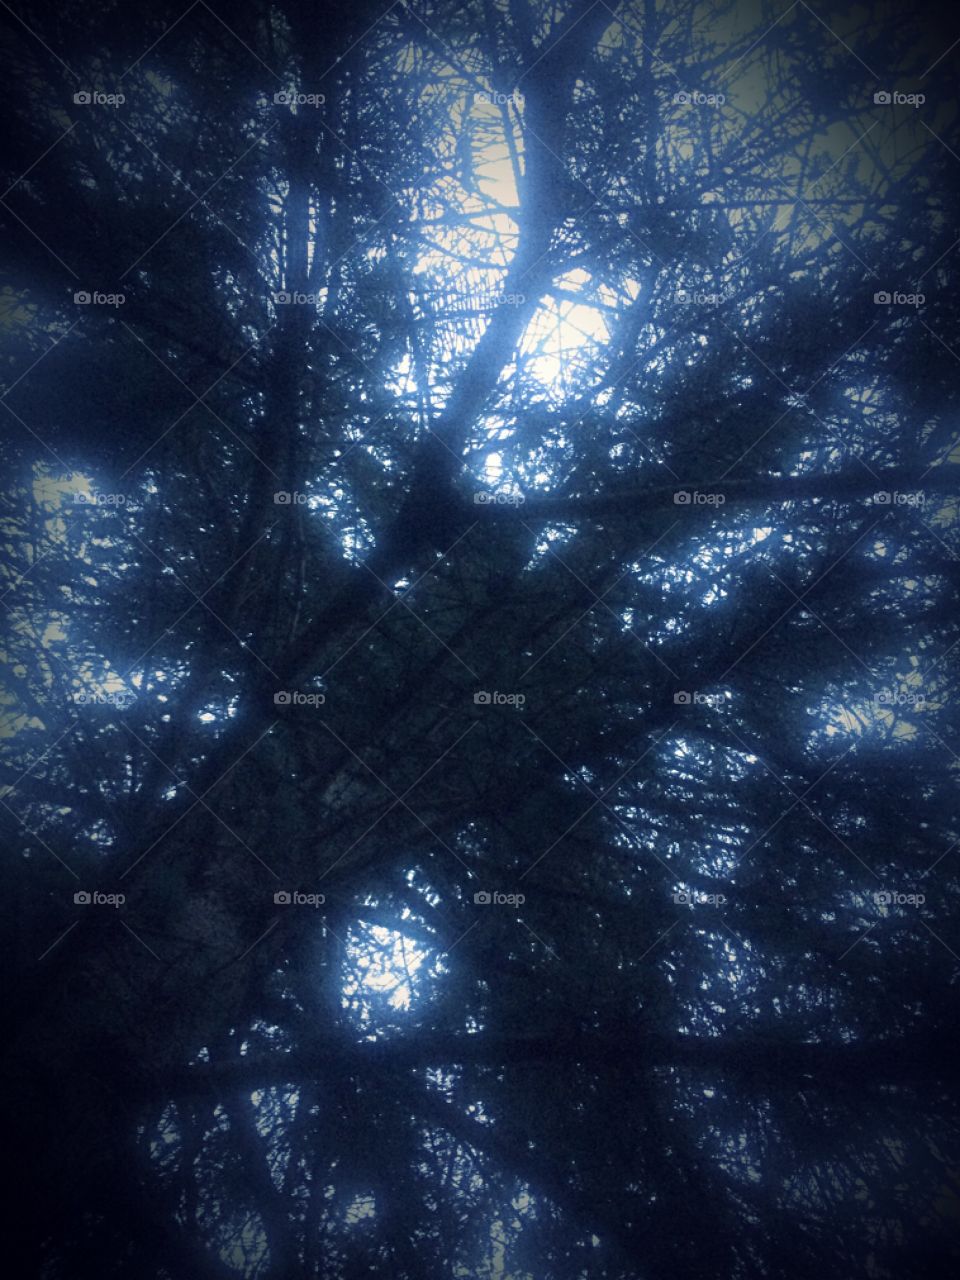 Looking at the sky through a tree 